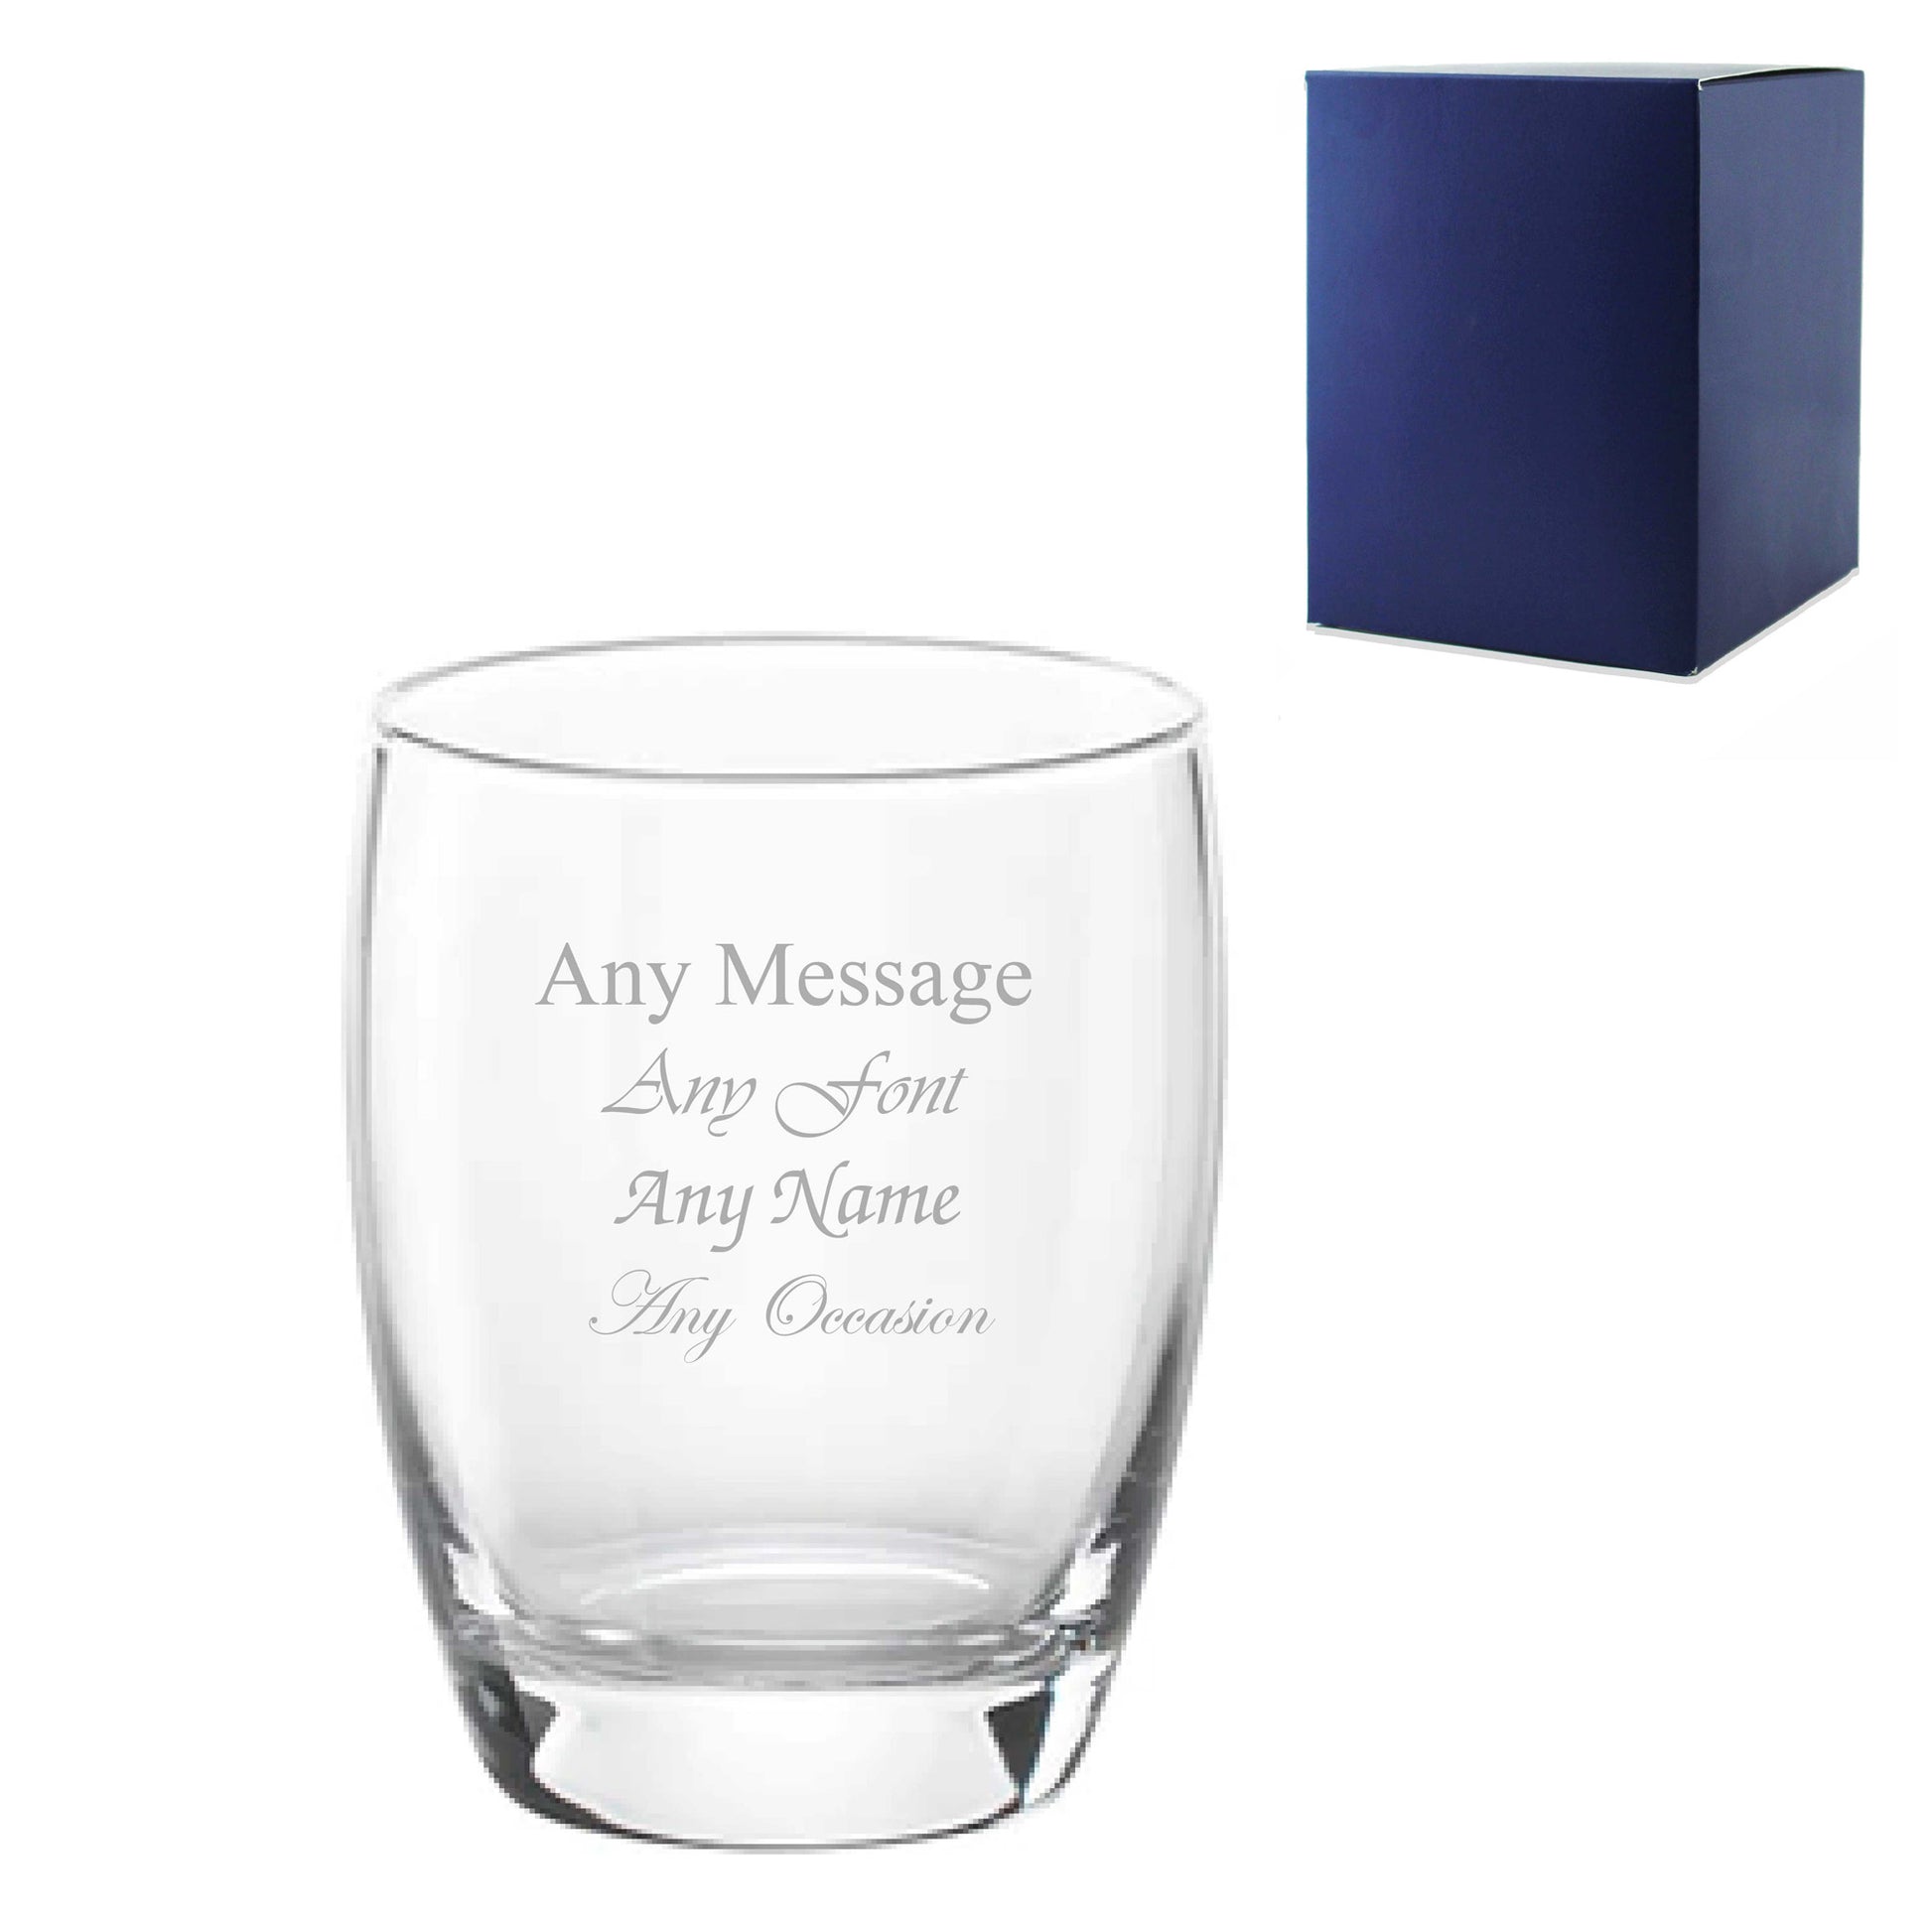 Engraved 300ml Curved Tumbler with Gift Box Image 1